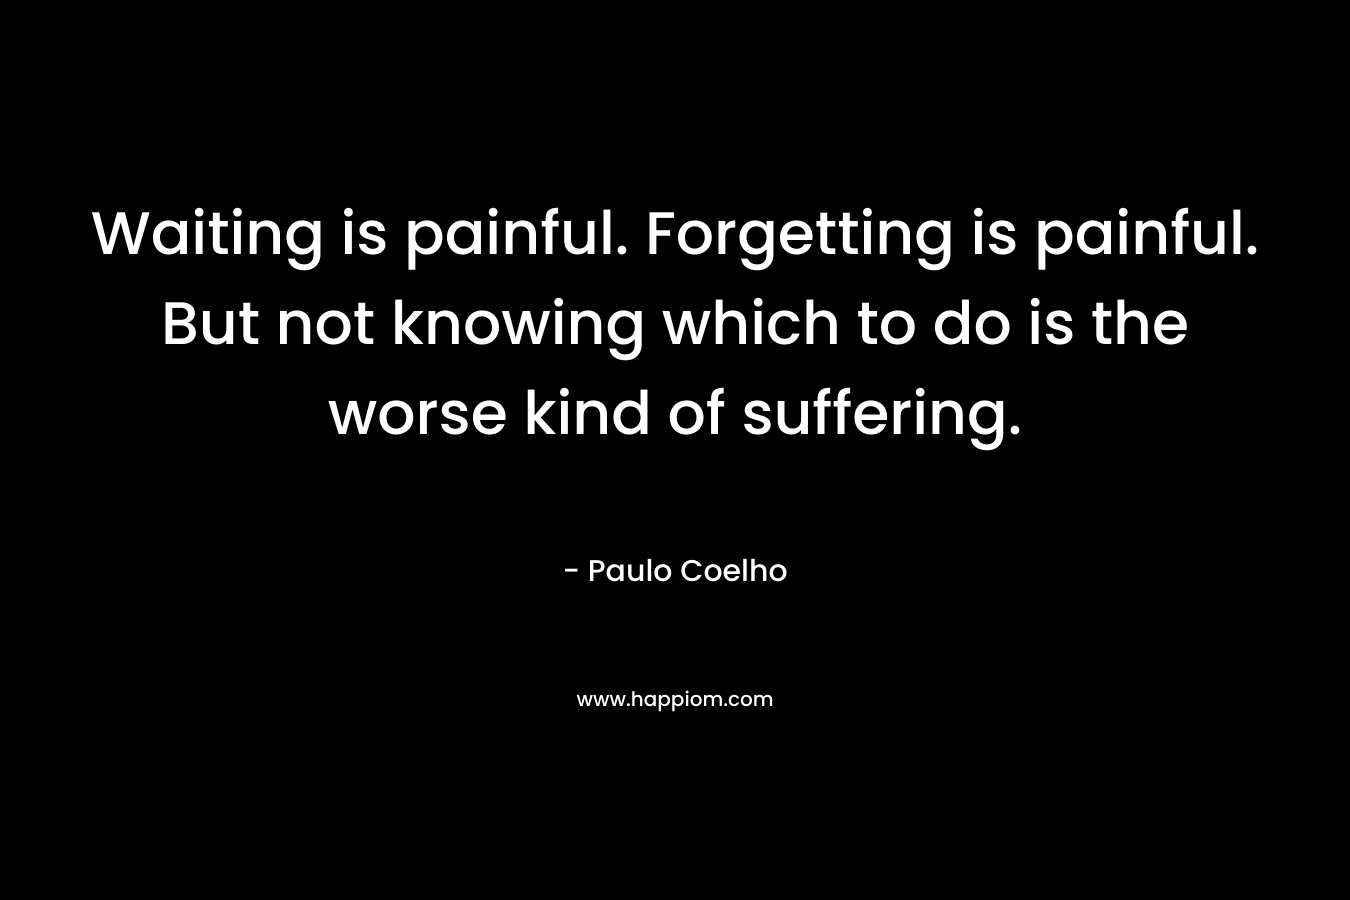 Waiting is painful. Forgetting is painful. But not knowing which to do is the worse kind of suffering.